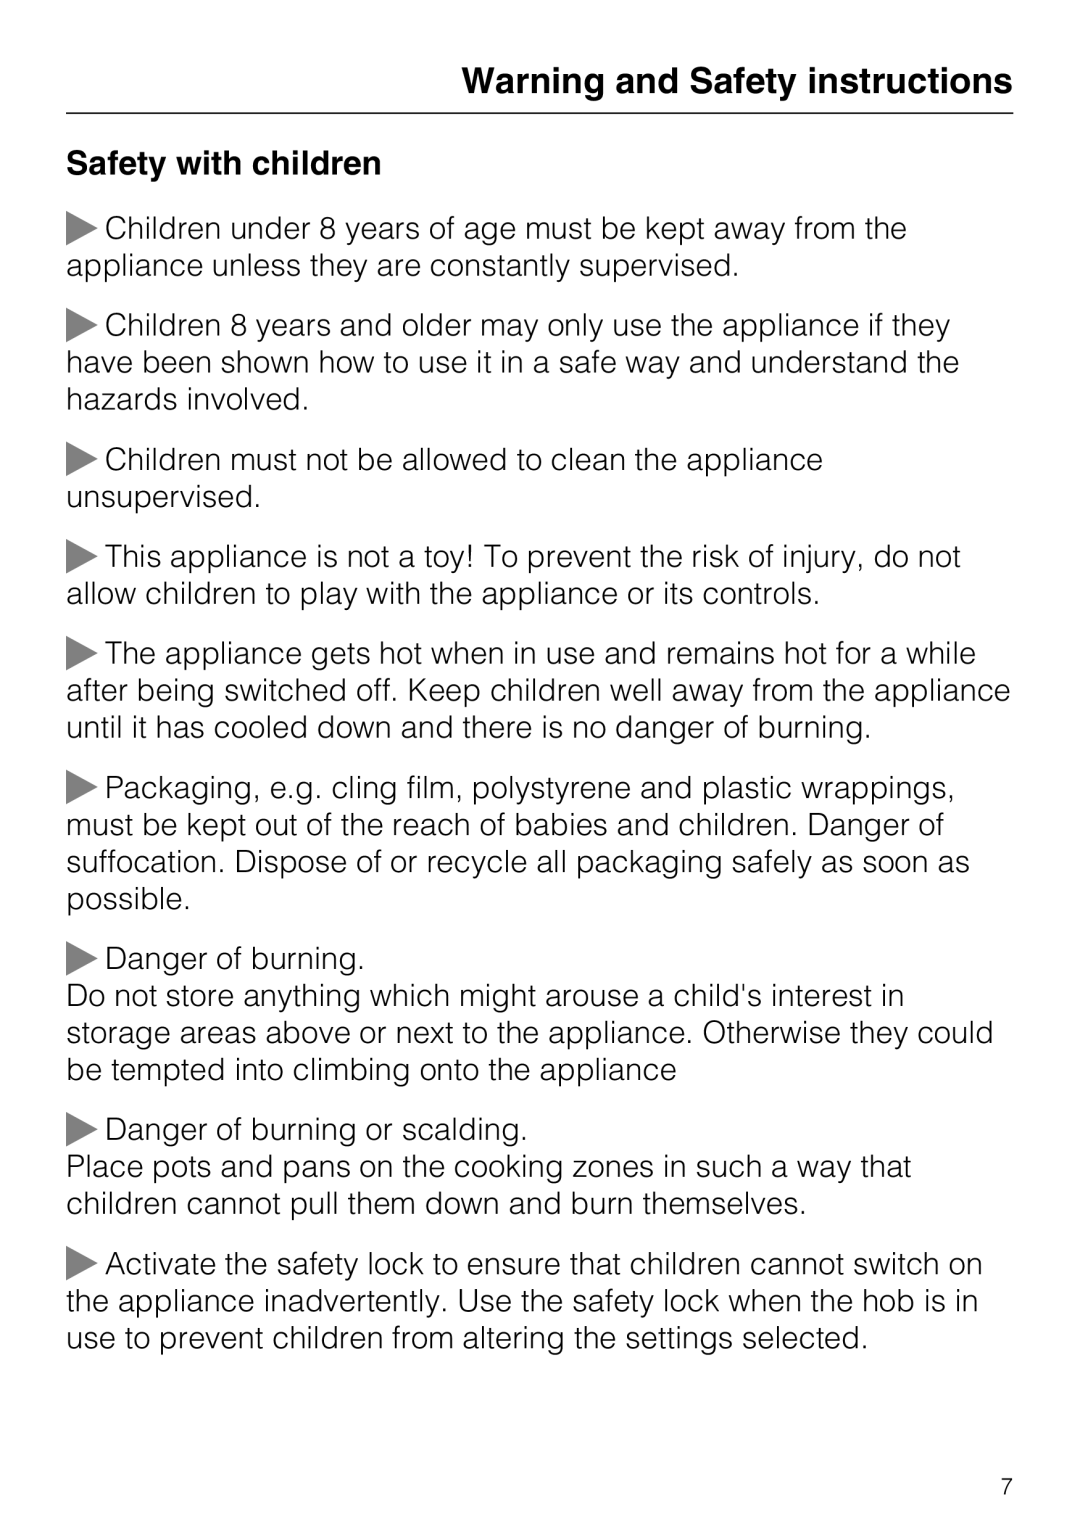 Miele KM6322, KM6323, KM6347, KM6348 installation instructions Safety with children, Warning and Safety instructions 